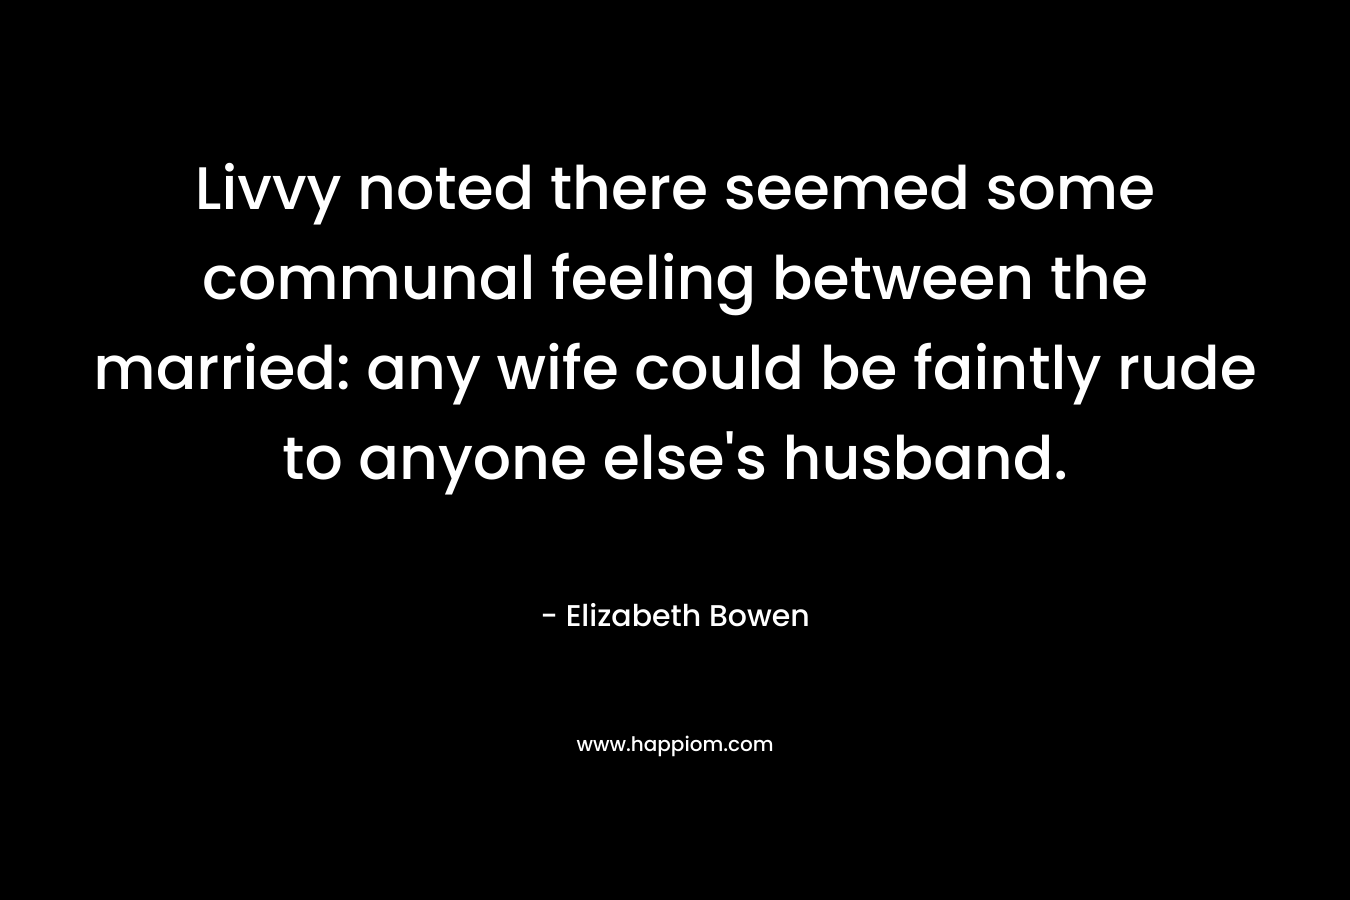 Livvy noted there seemed some communal feeling between the married: any wife could be faintly rude to anyone else's husband.